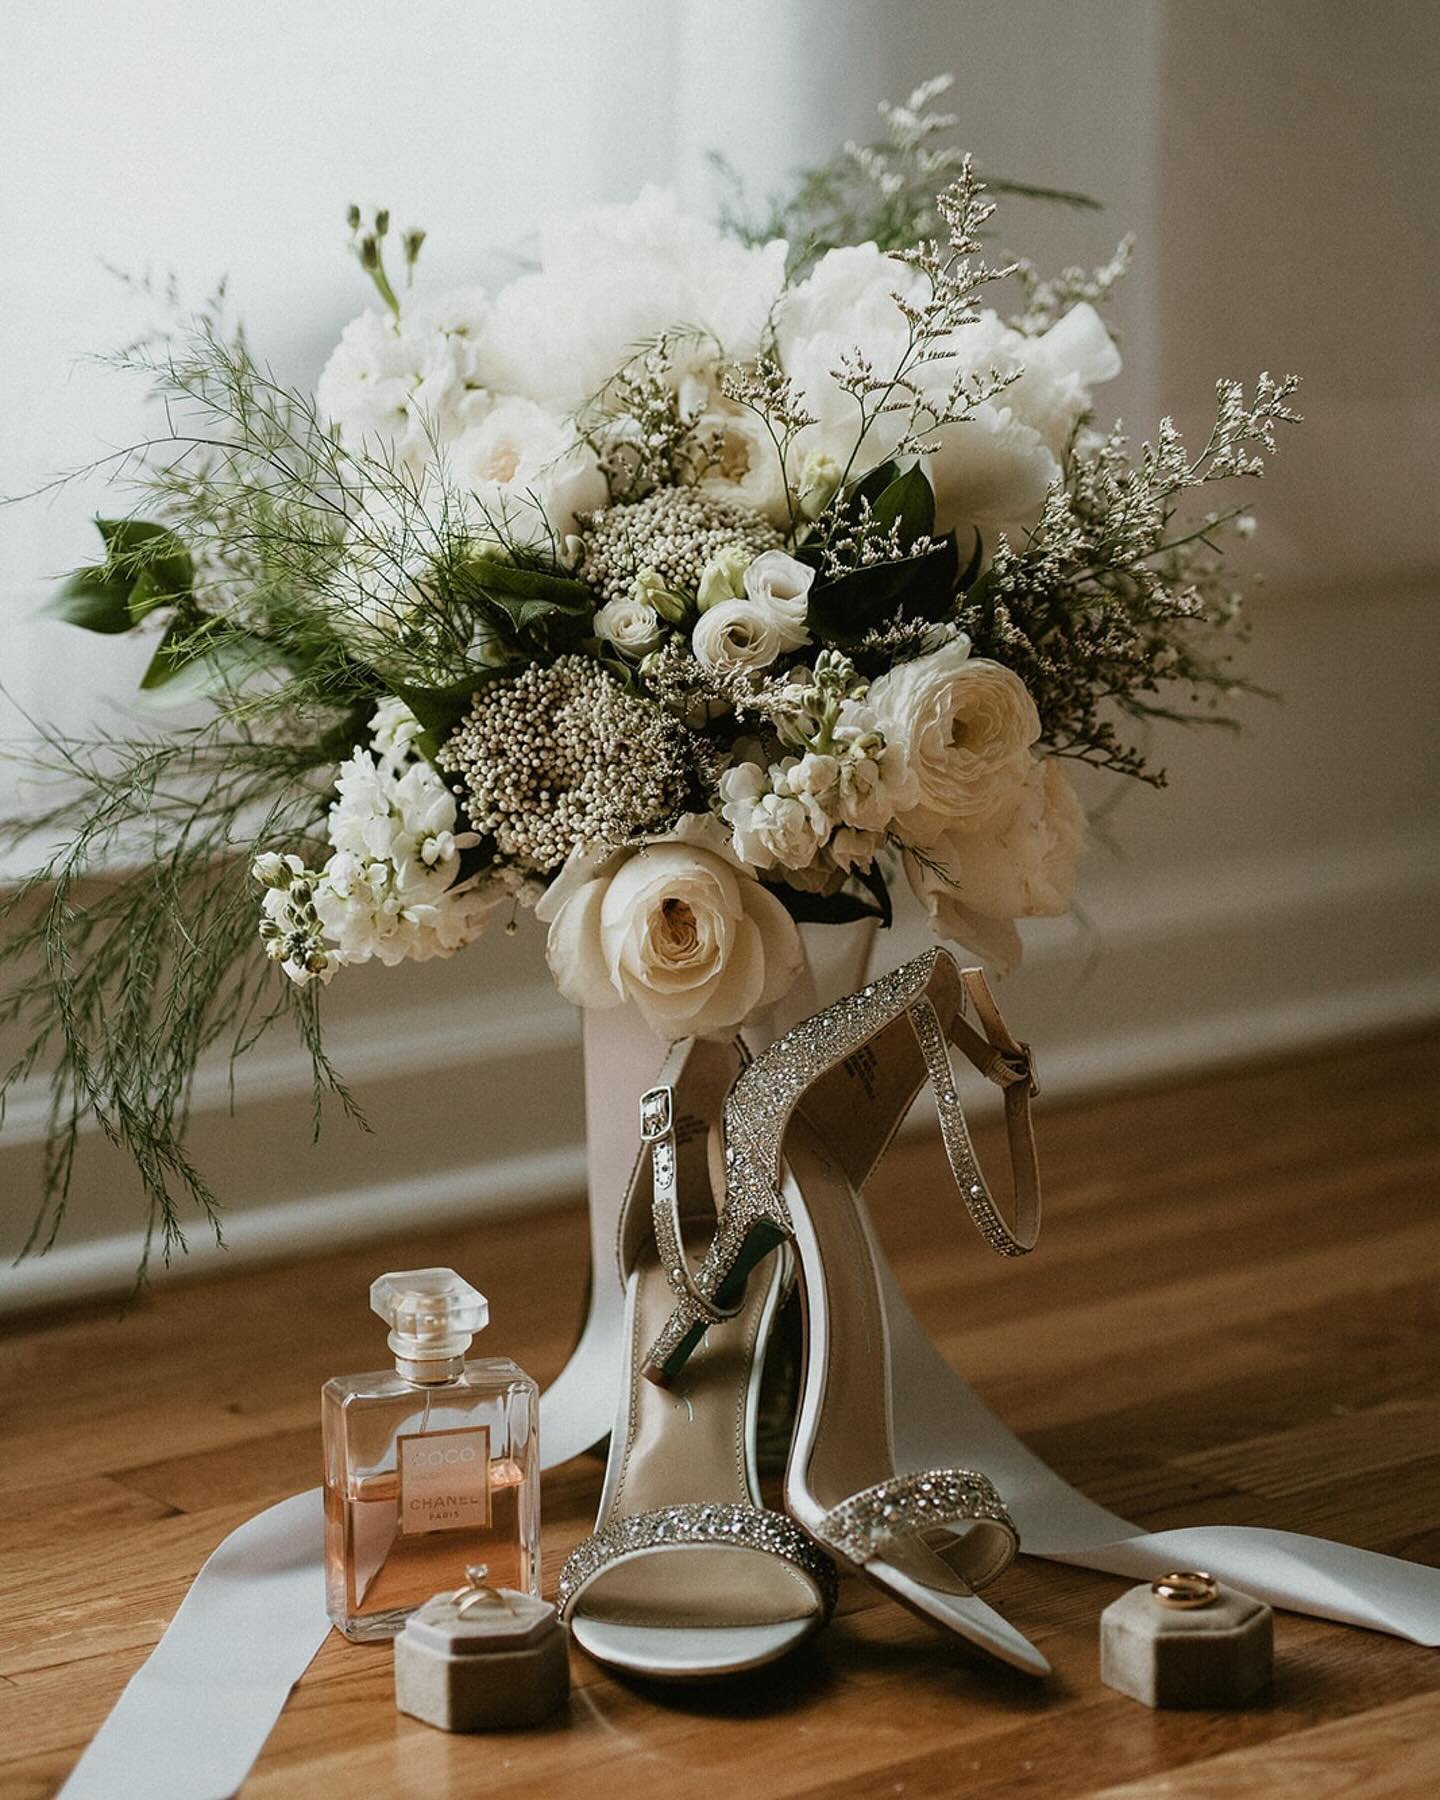 Every so often I am asked to do something a little extra special. When Kat reached out about her wedding bouquet, I was so excited to have the opportunity to make her something beautiful. She said her theme was white, and gave me some creative freedo